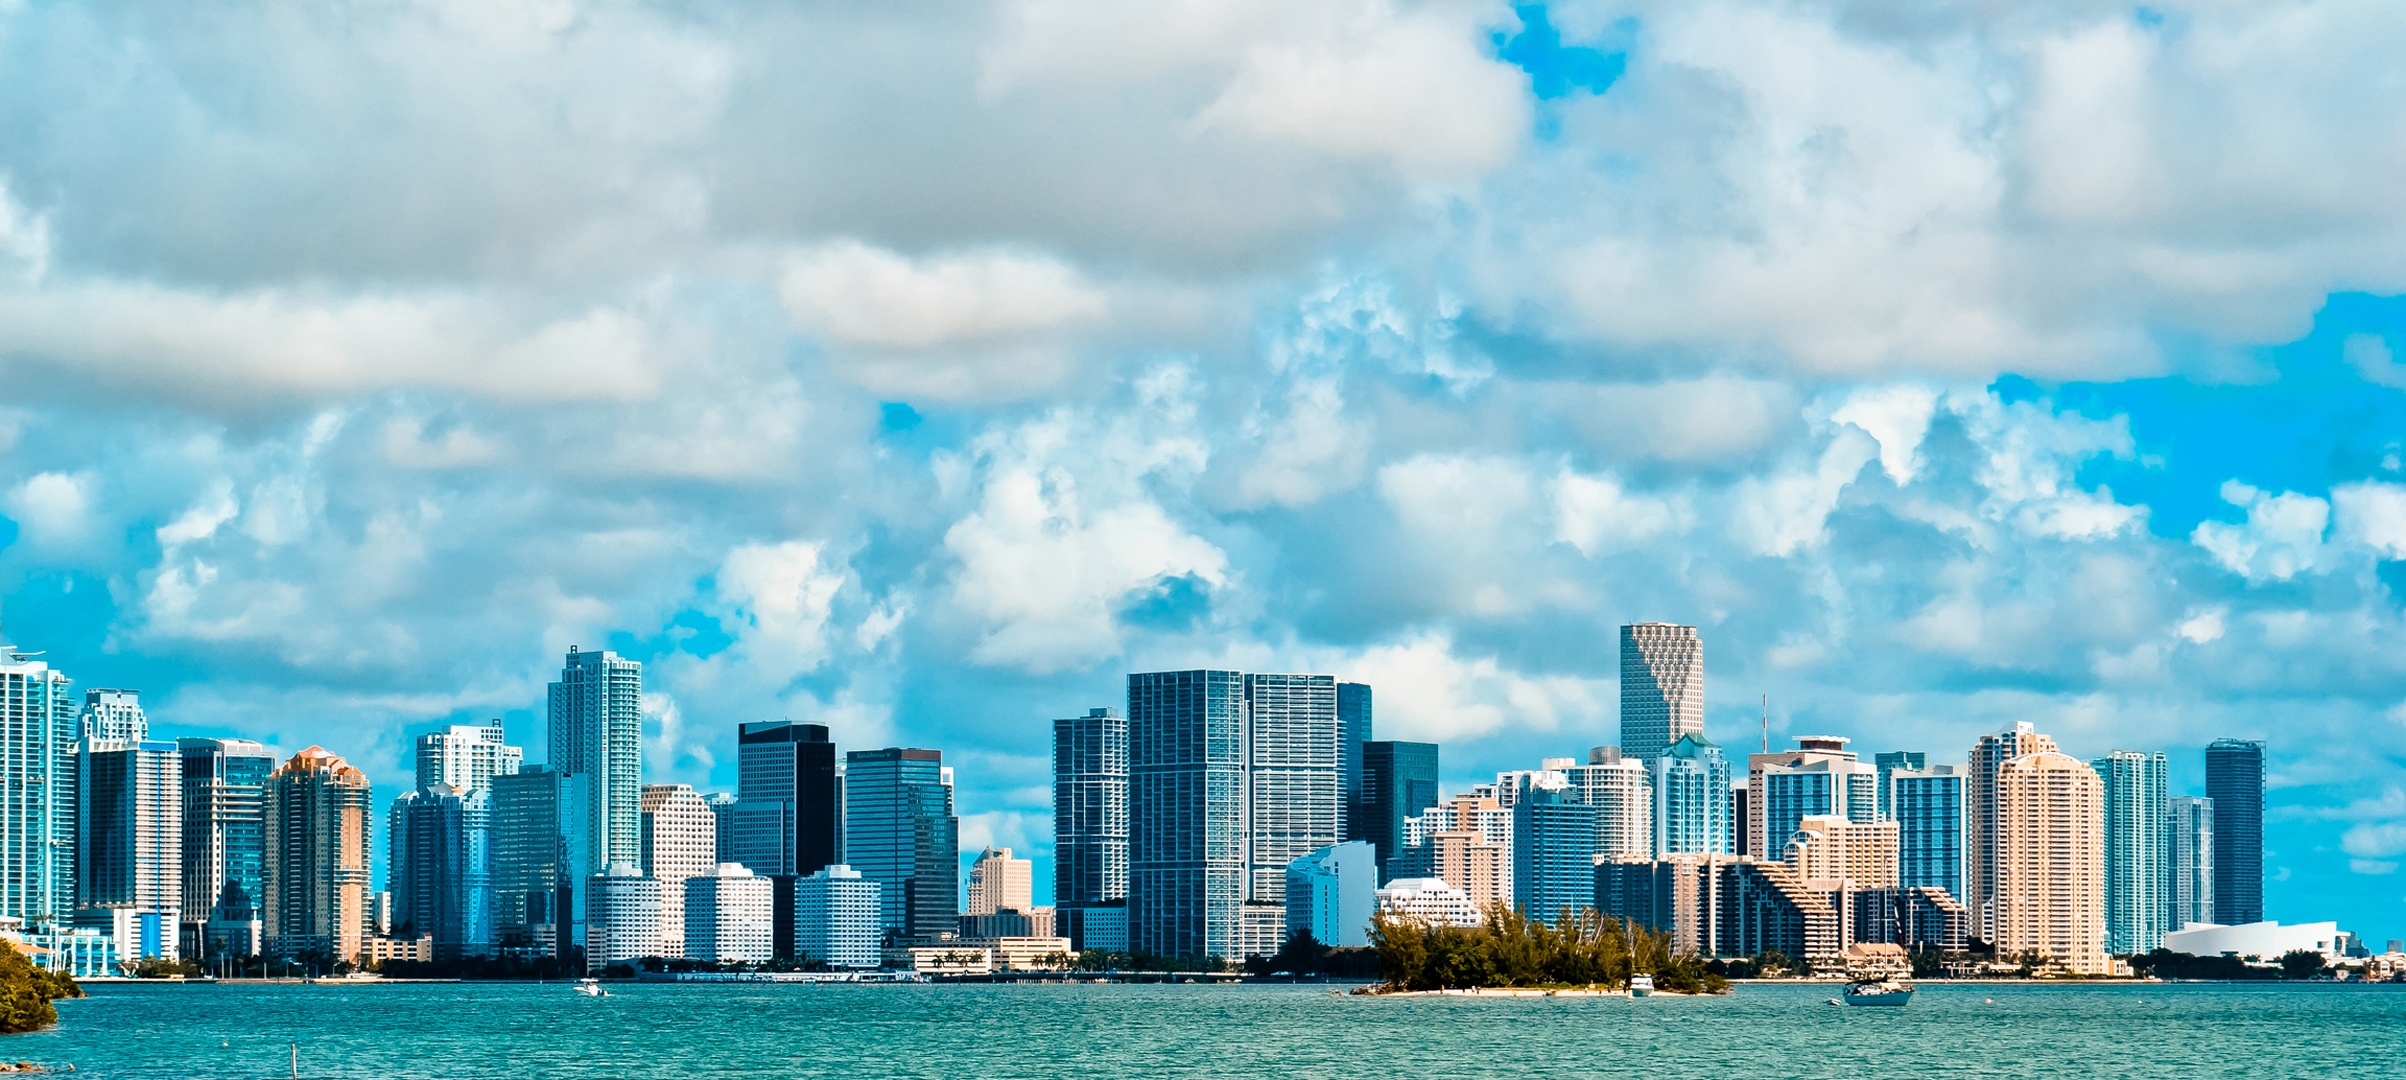 cities, sky, clouds, usa, building, united states, america, miami, florida, high-rise buildings, miami beach